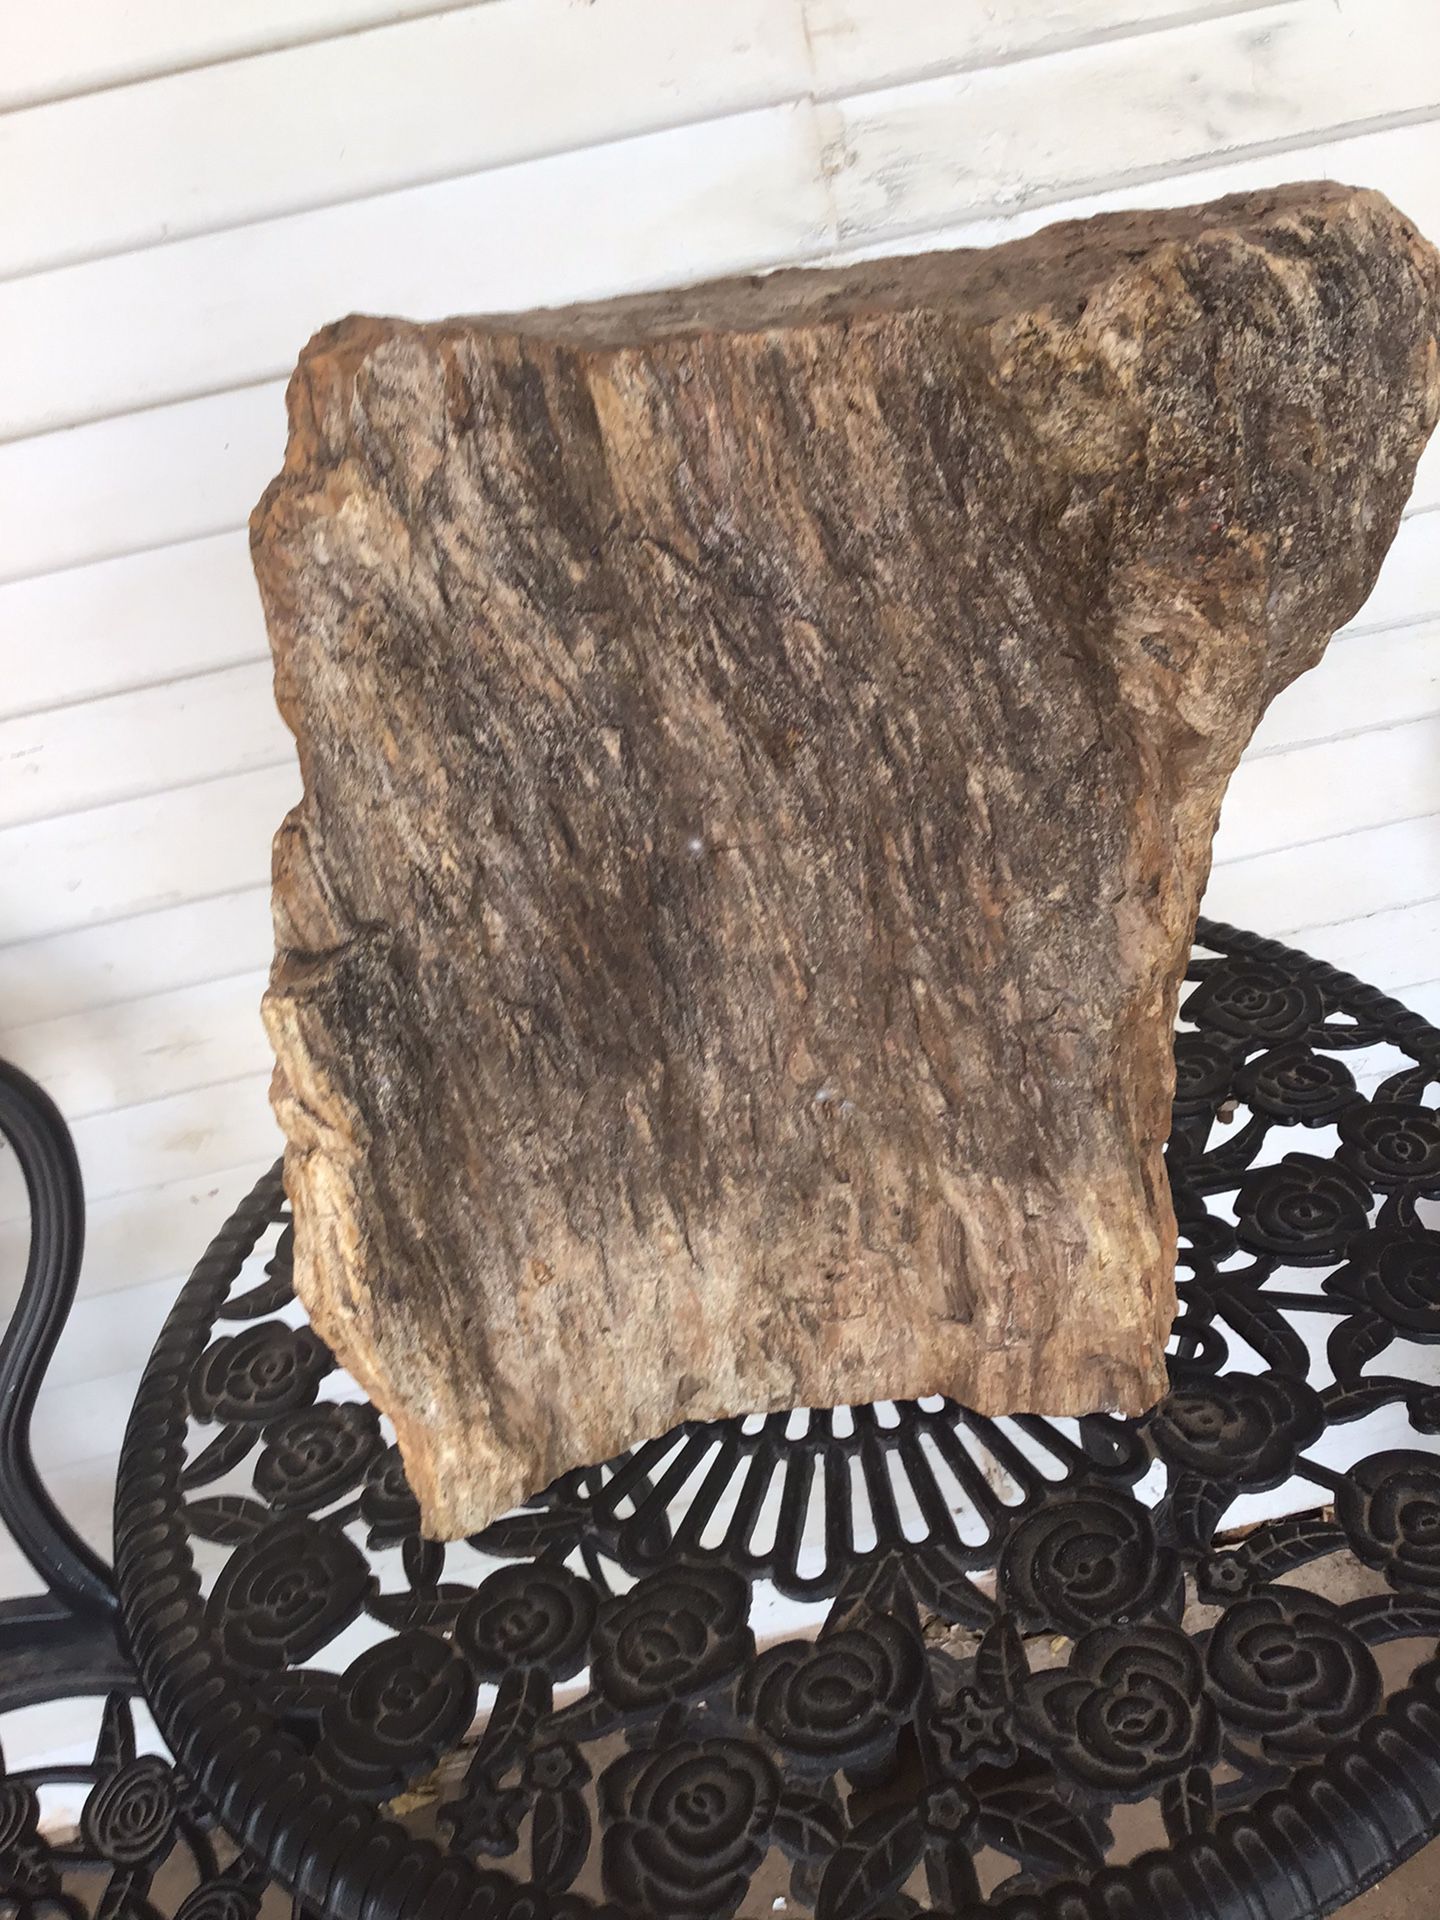 Petrified wood 16 Inches Tall 10 Inches Wide   You Can See The Bark Of The Tree